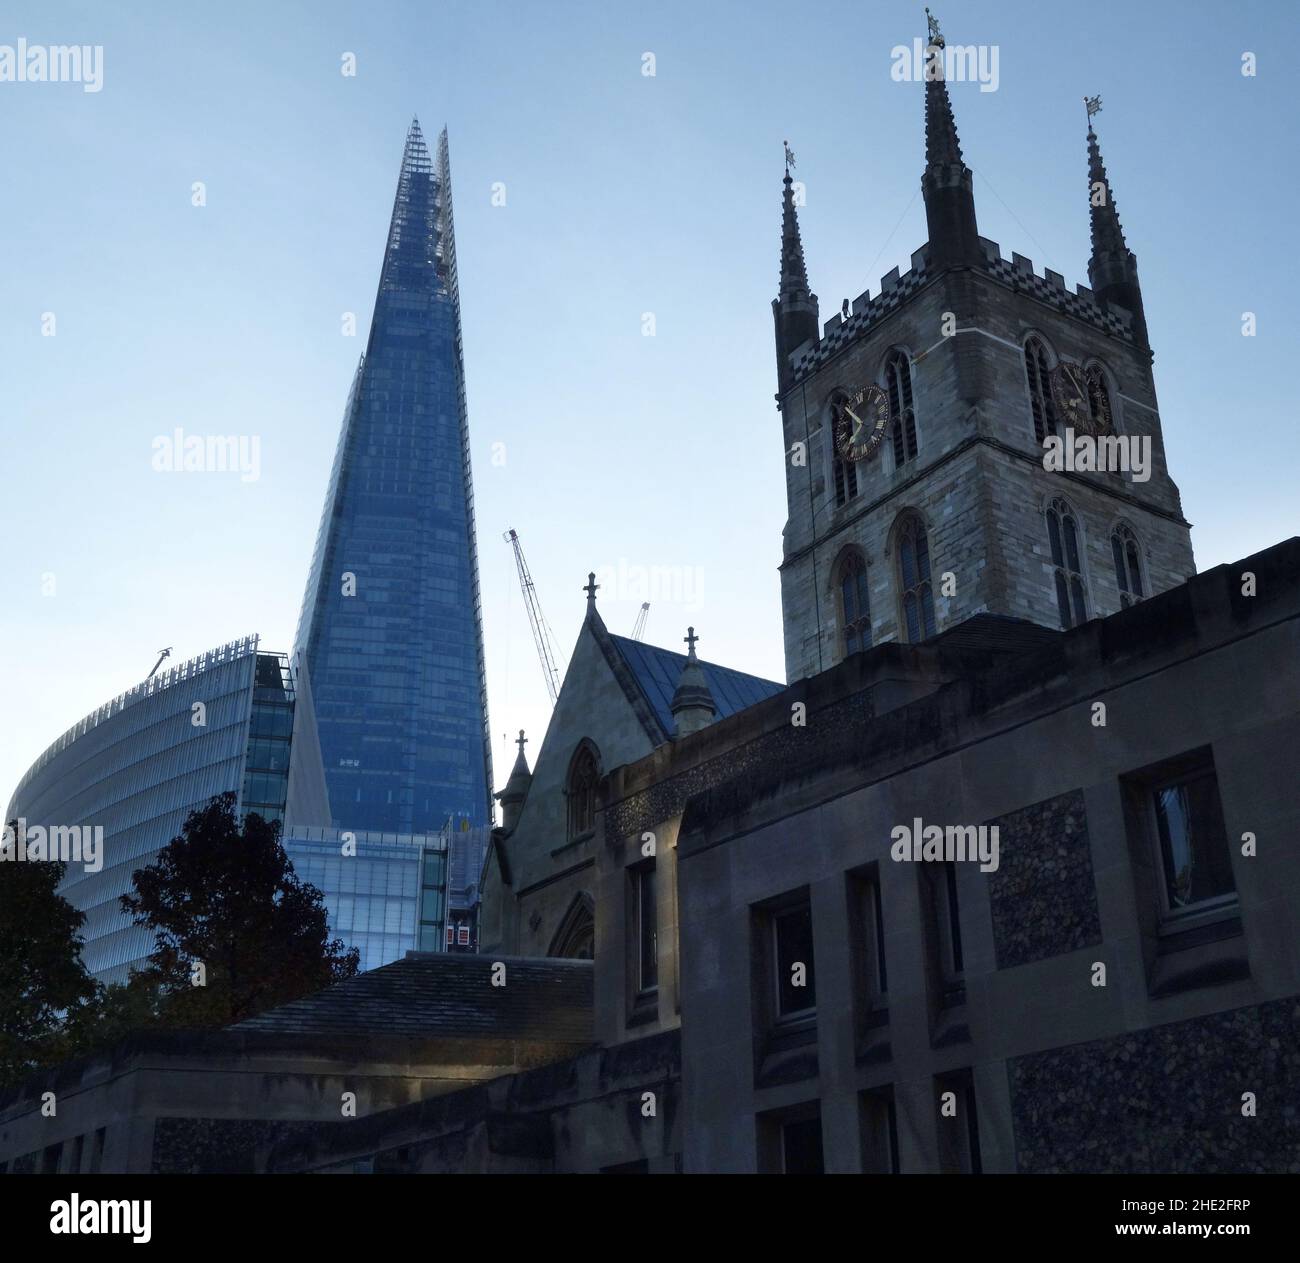 The old and the new. The Shard with Southwark Cathedral in the foreground. Stock Photo